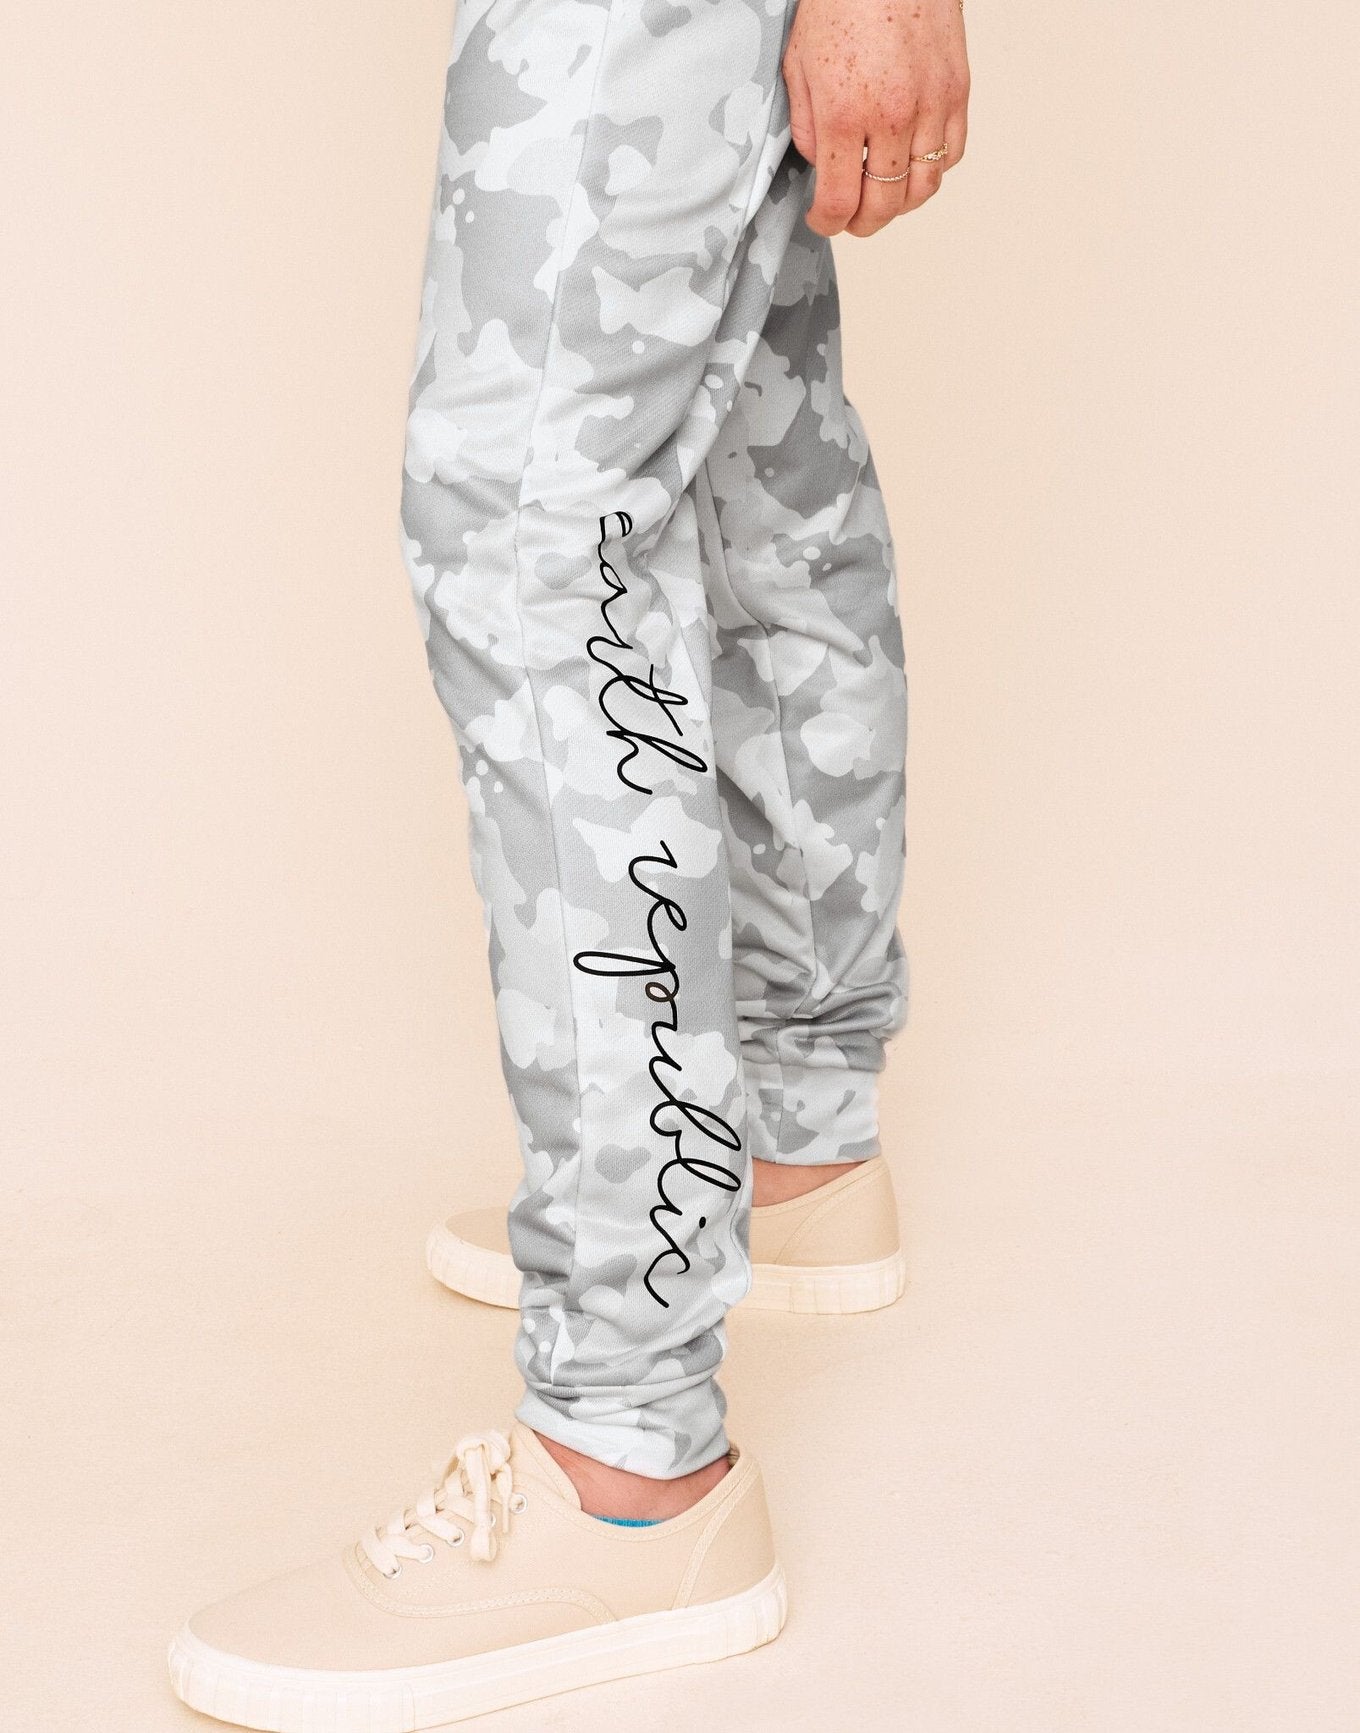 Earth Republic Shawn Jogger Pant Joggers in color Camouflage (Athleisure Print 3) and shape jogger